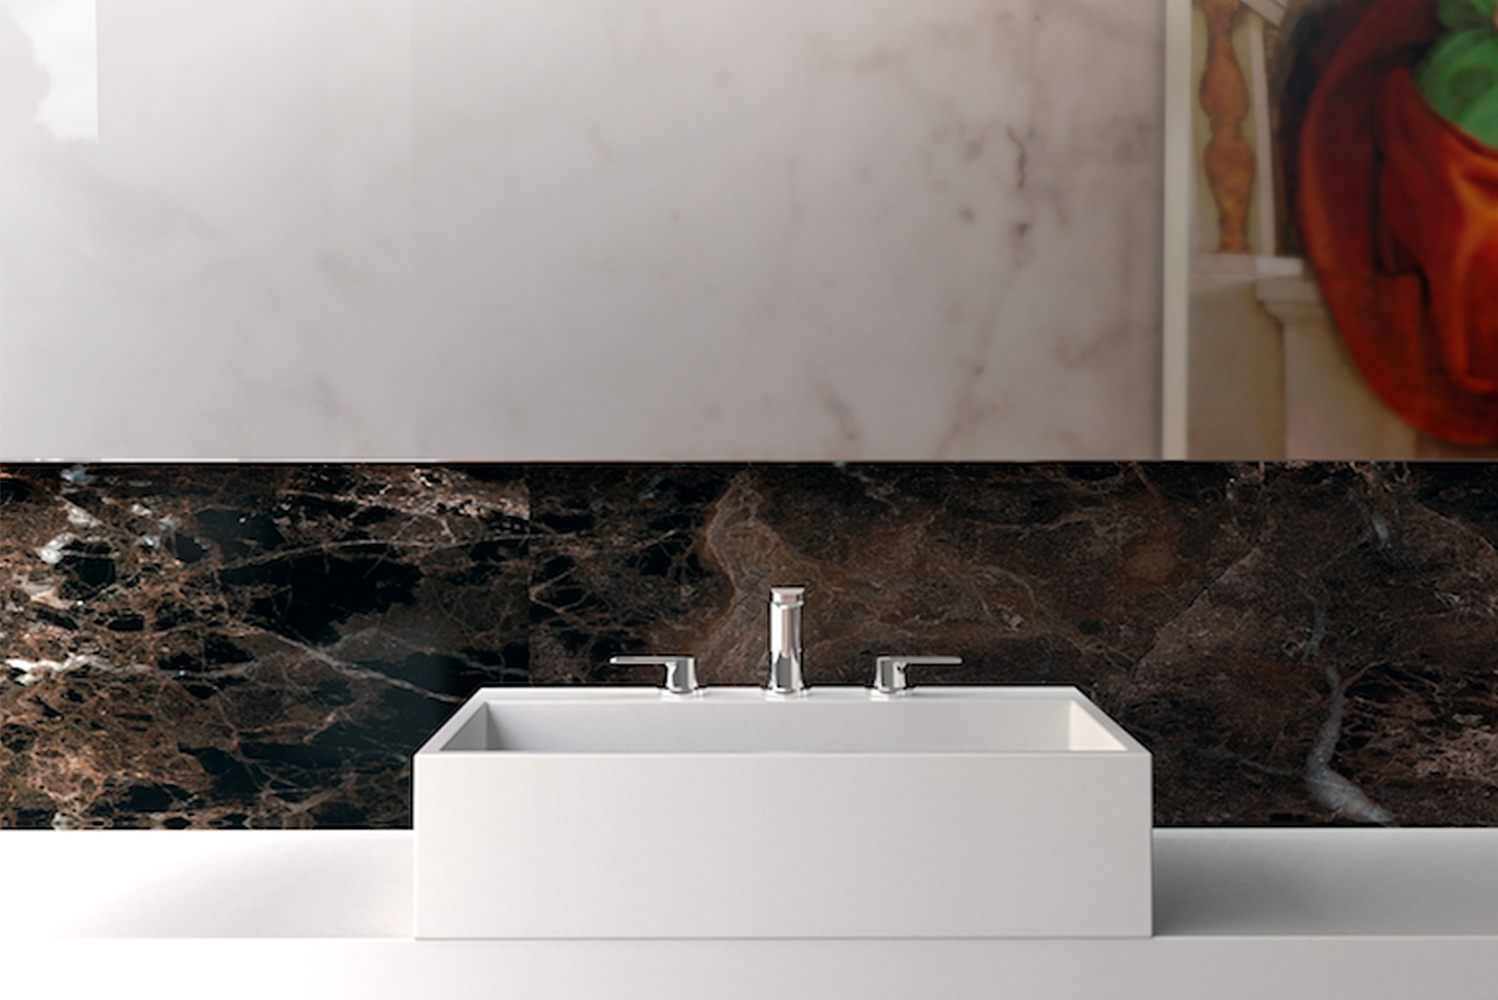 Named Sublime the sink has a geometric basin in either countertop of vanity mounts 